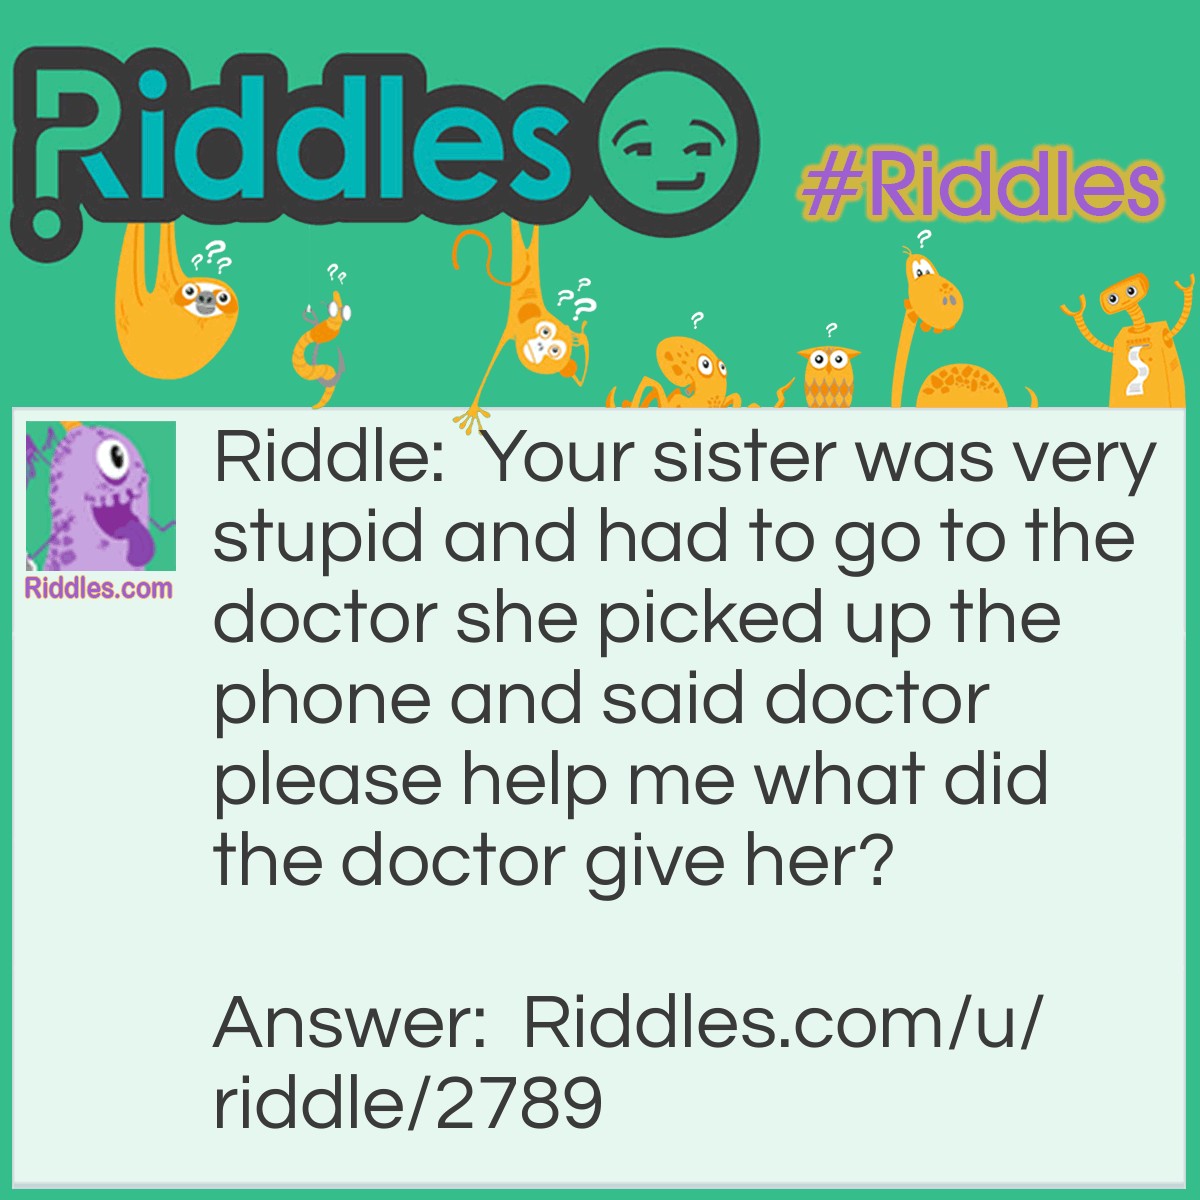 Riddle: Your sister was very stupid and had to go to the doctor she picked up the phone and said doctor please help me what did the doctor give her? Answer: Dr. Pepper with some spicy pepper on the side.